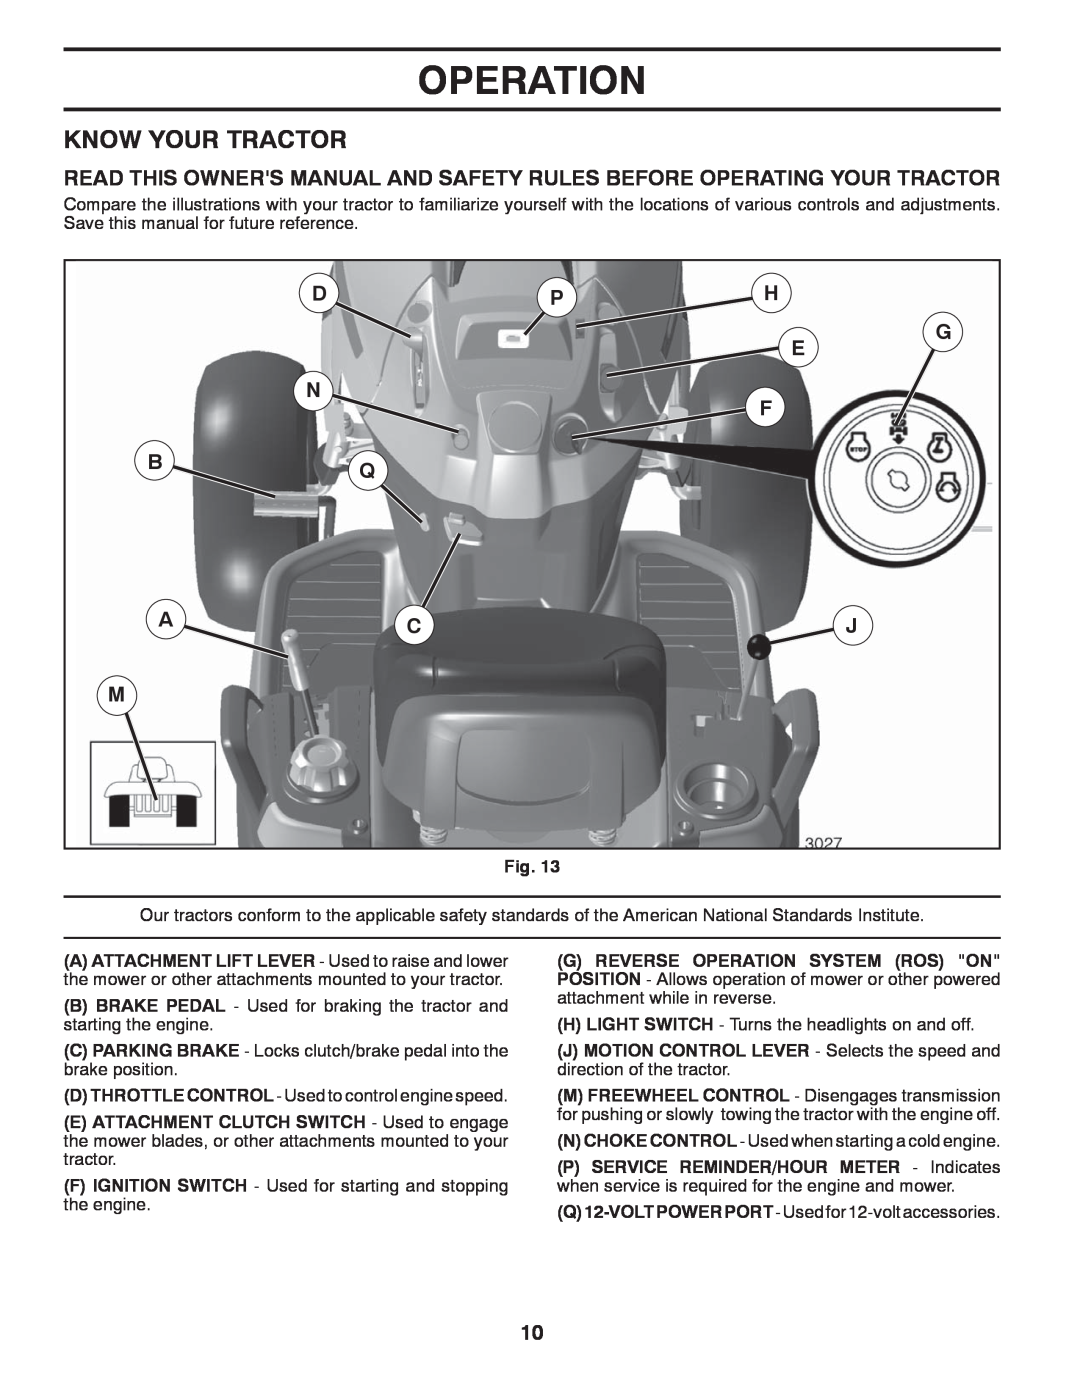 Husqvarna 96045001501, 532 42 89-49 owner manual Know Your Tractor, Bq Acj M, Operation 